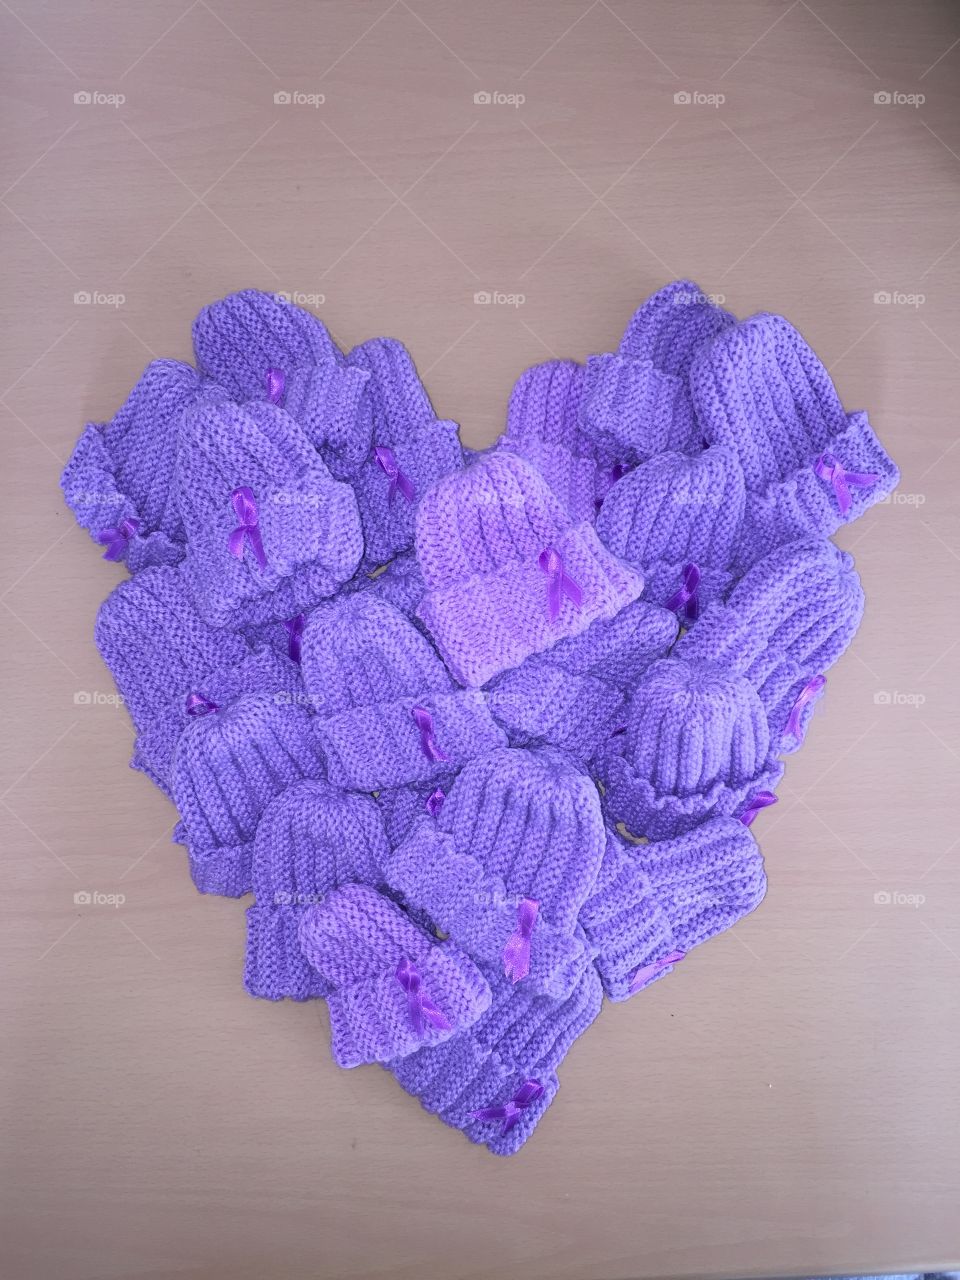 Purple Baby hats for premature babies on World Prematurity Day November 17th.